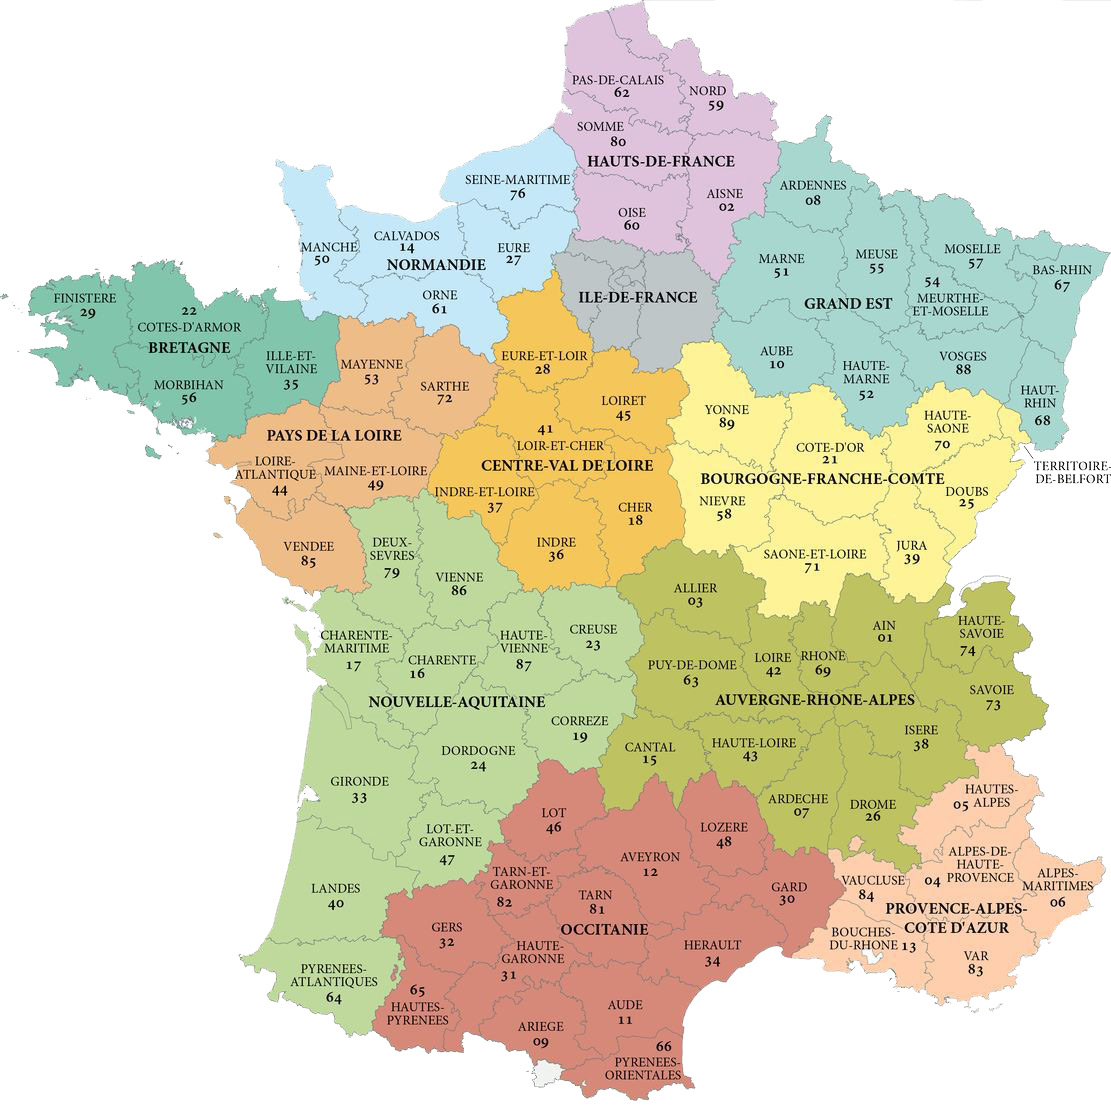 26-regions-of-france-on-a-map-online-map-around-the-world-riset